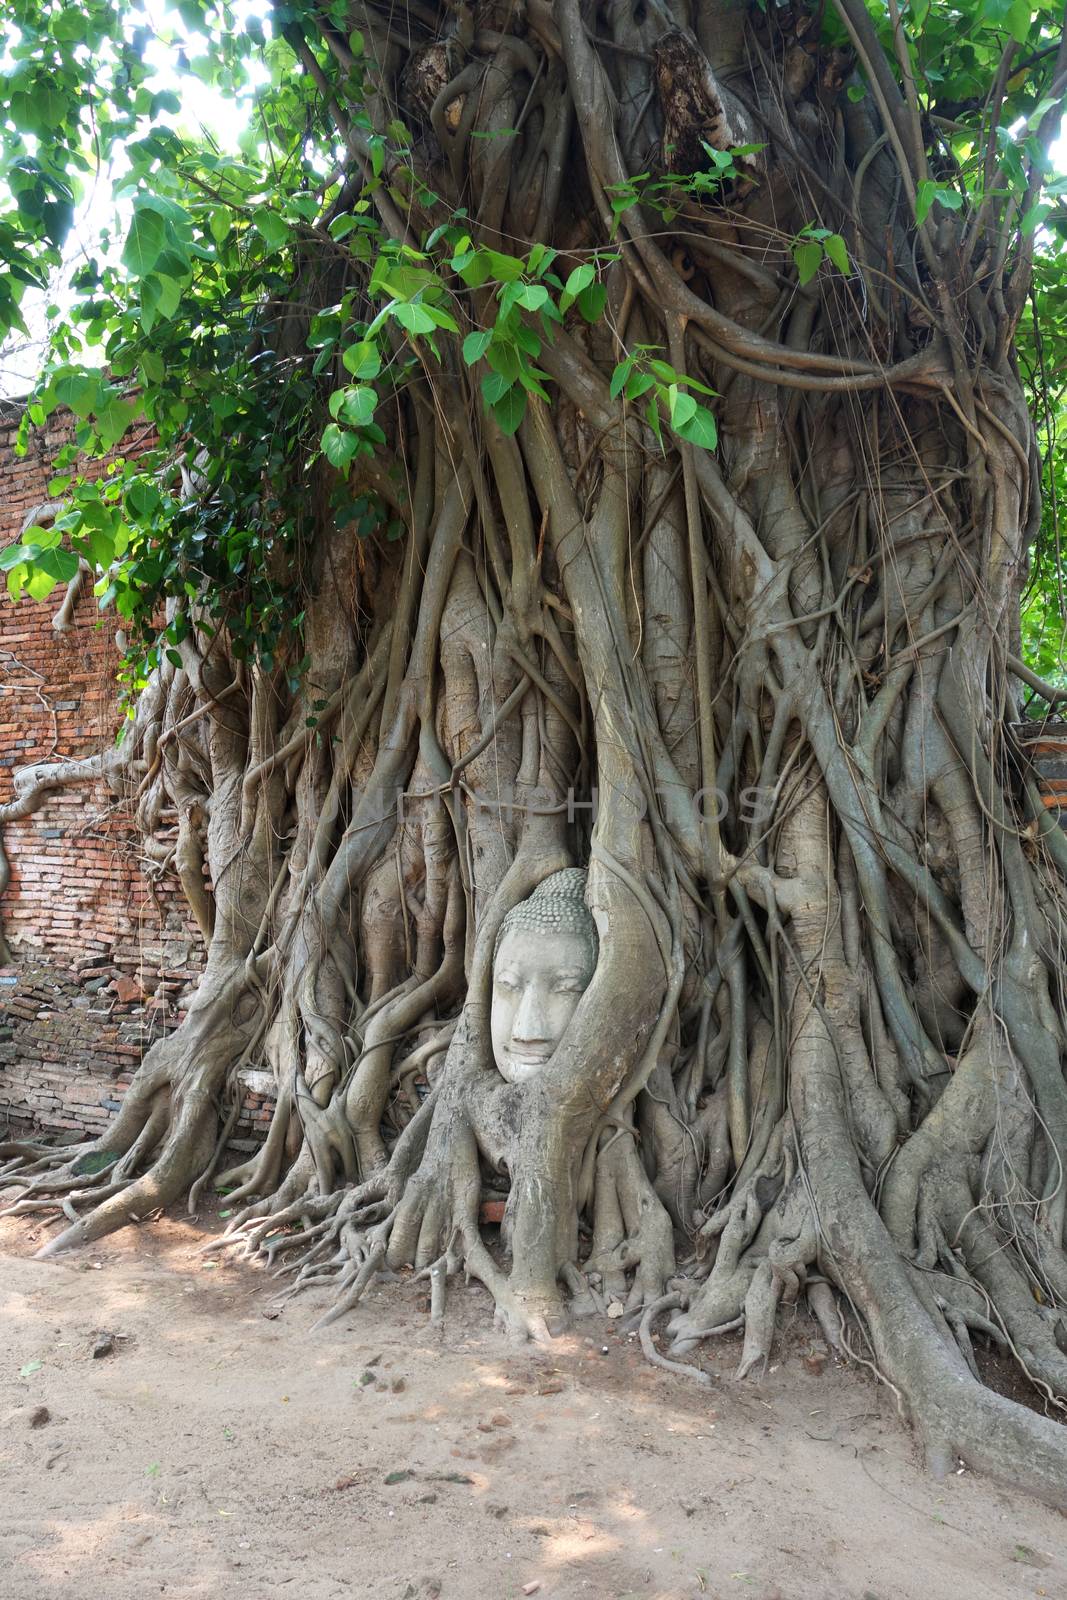 Head of sandstone buddha in tree root by tang90246